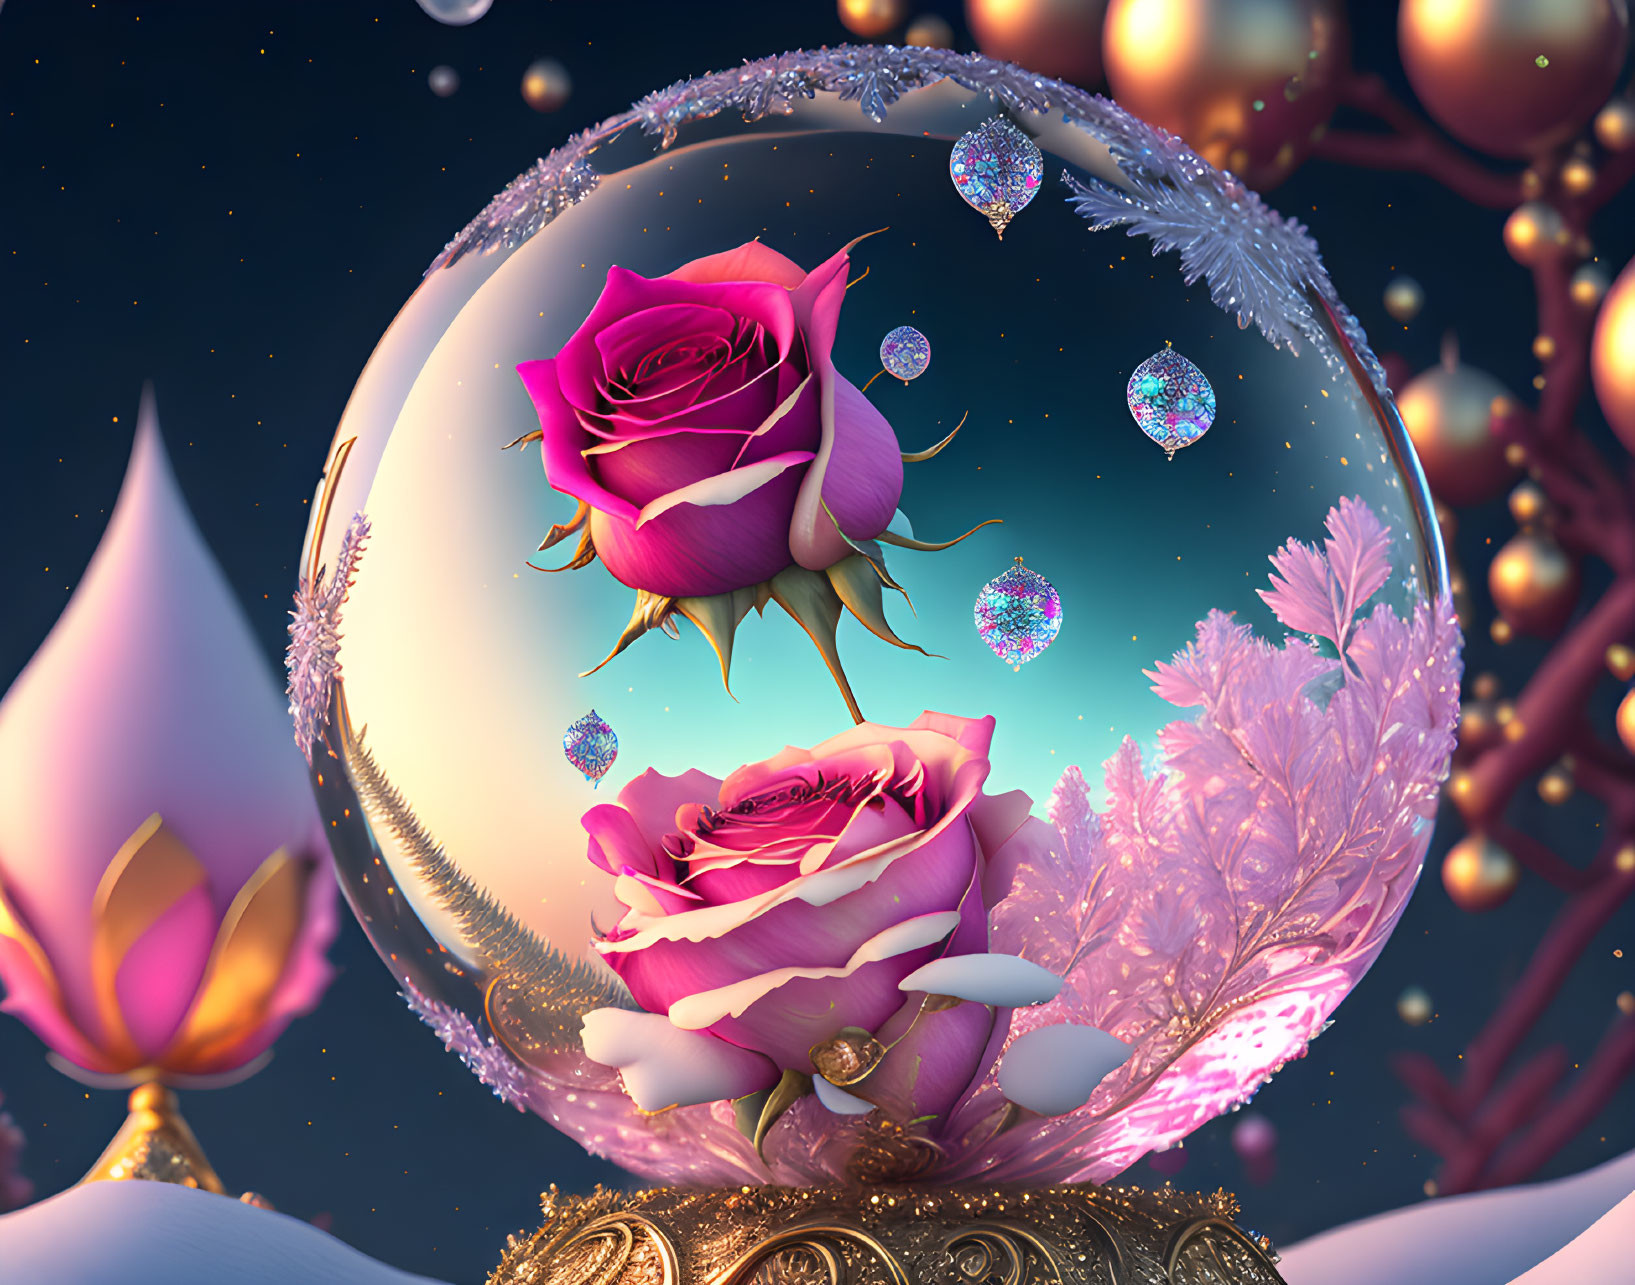 Levitating roses in transparent sphere with orbs, crystals, and ethereal flora